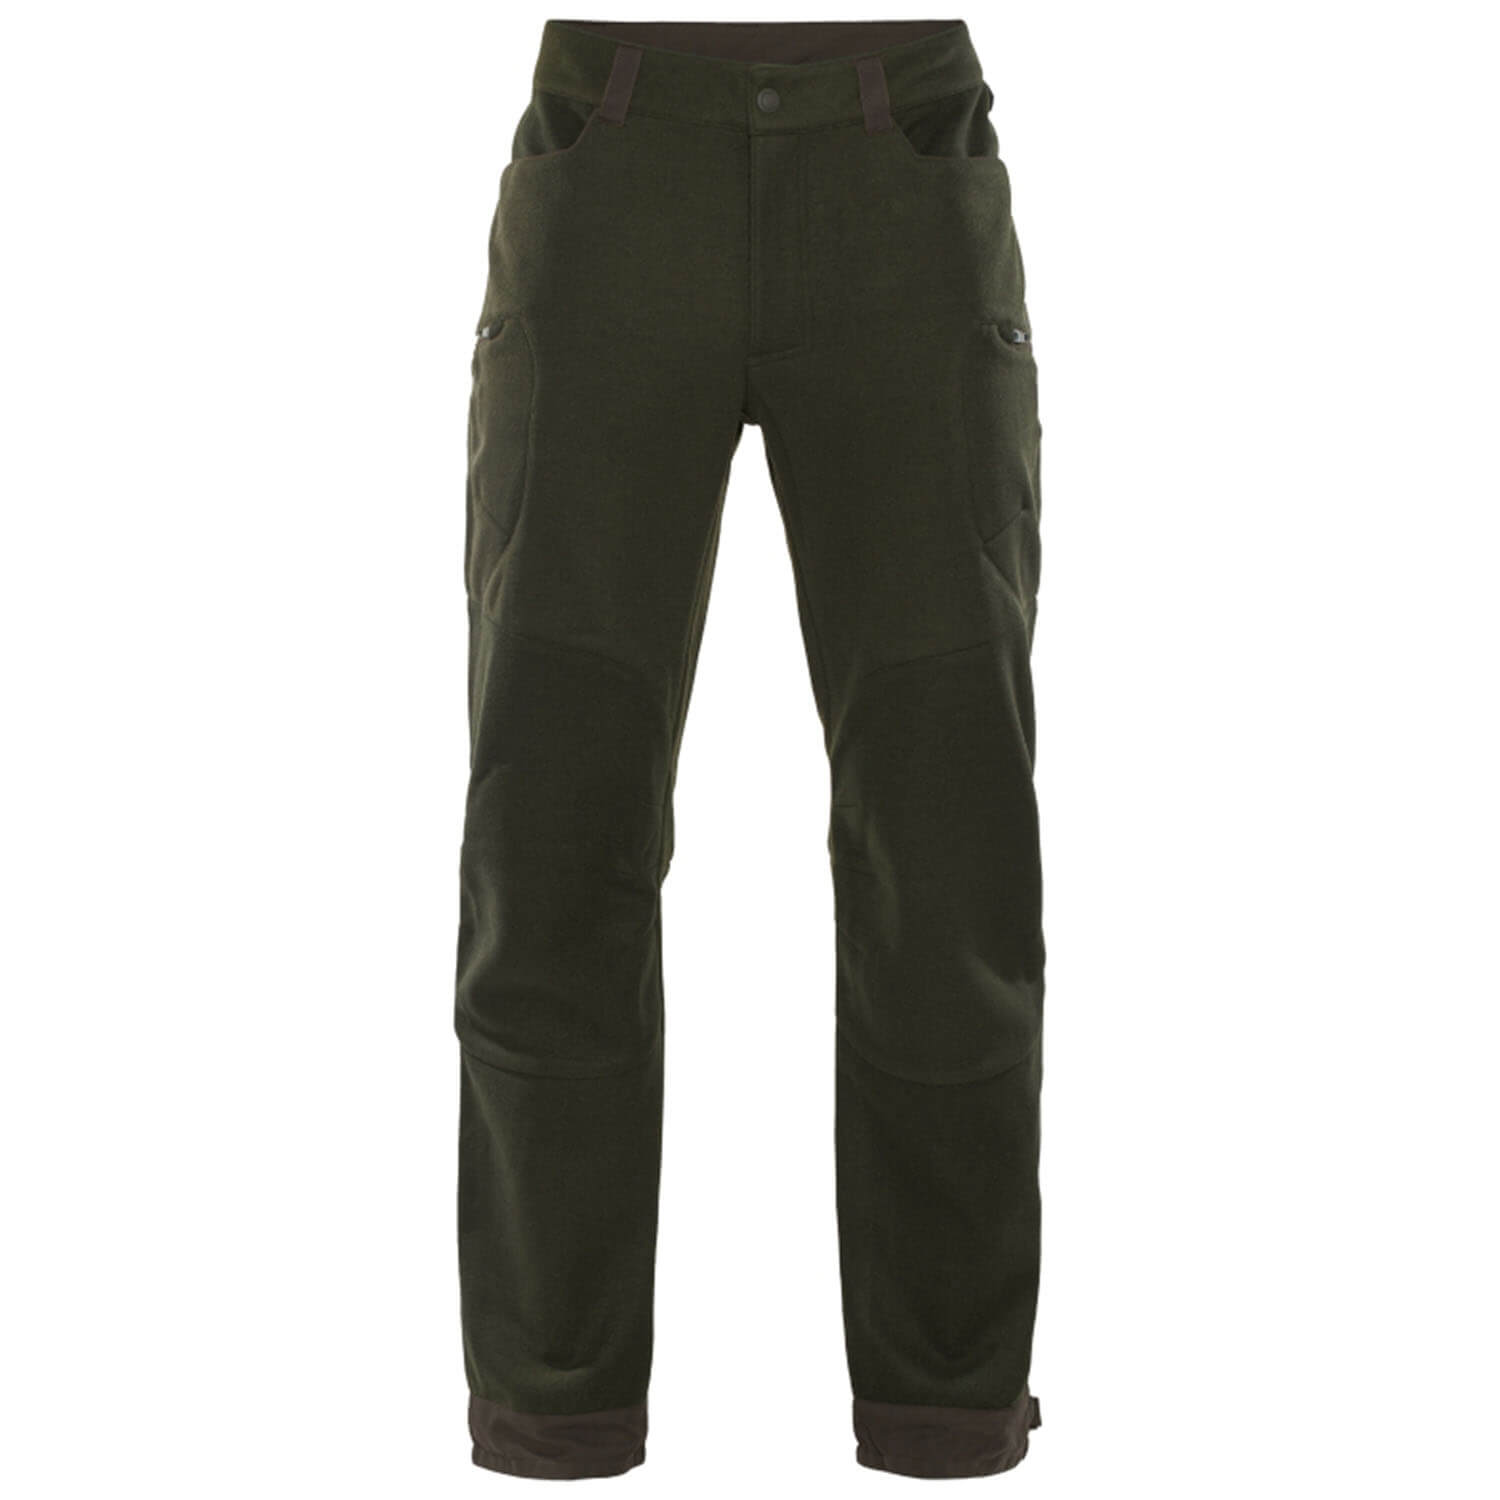 Härkila lodentrousers Metso hybrid - Hunting Trousers